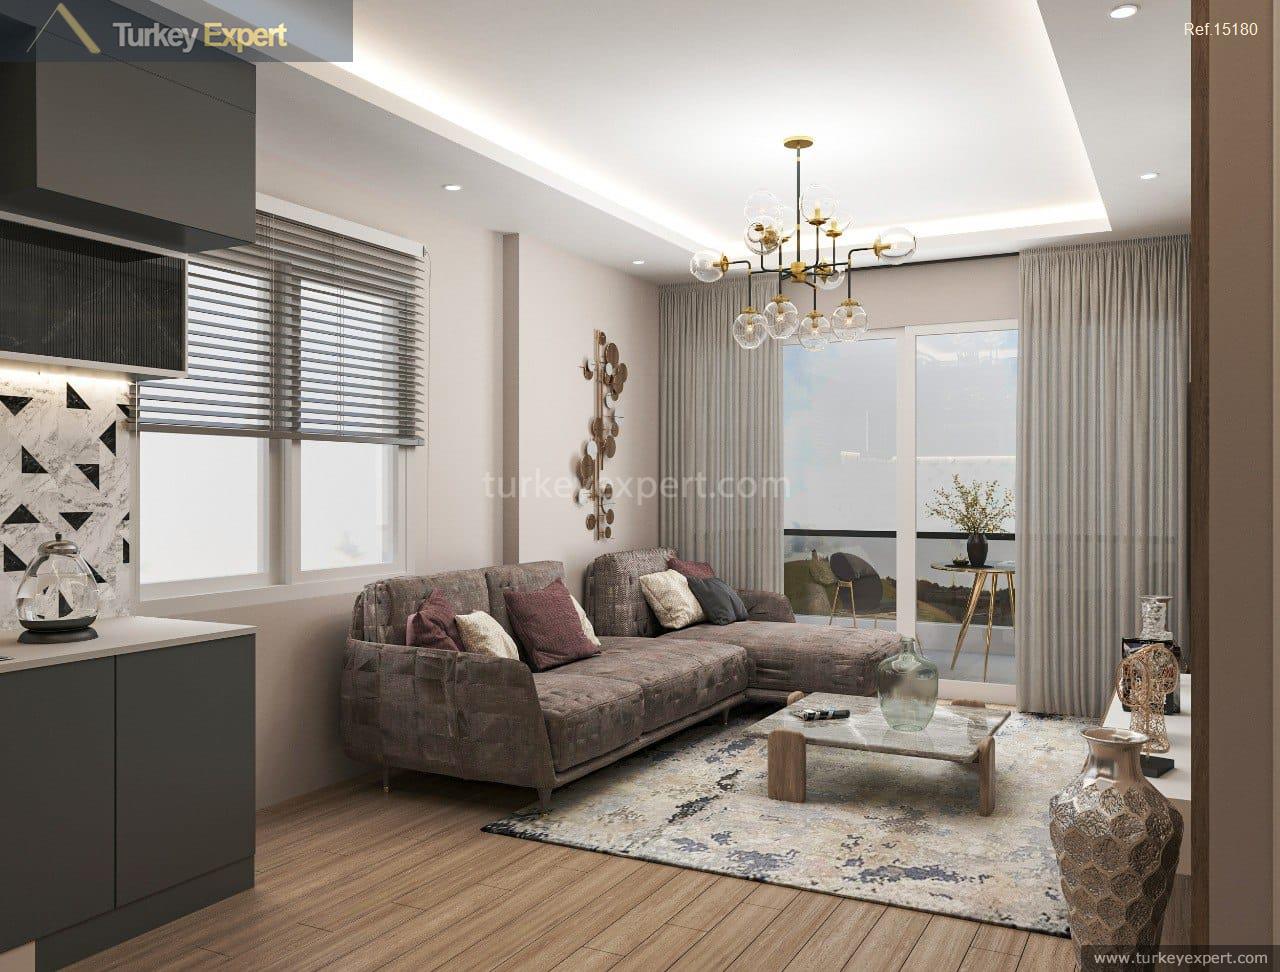 bargainprice apartments for sale in mersin payment plan available16